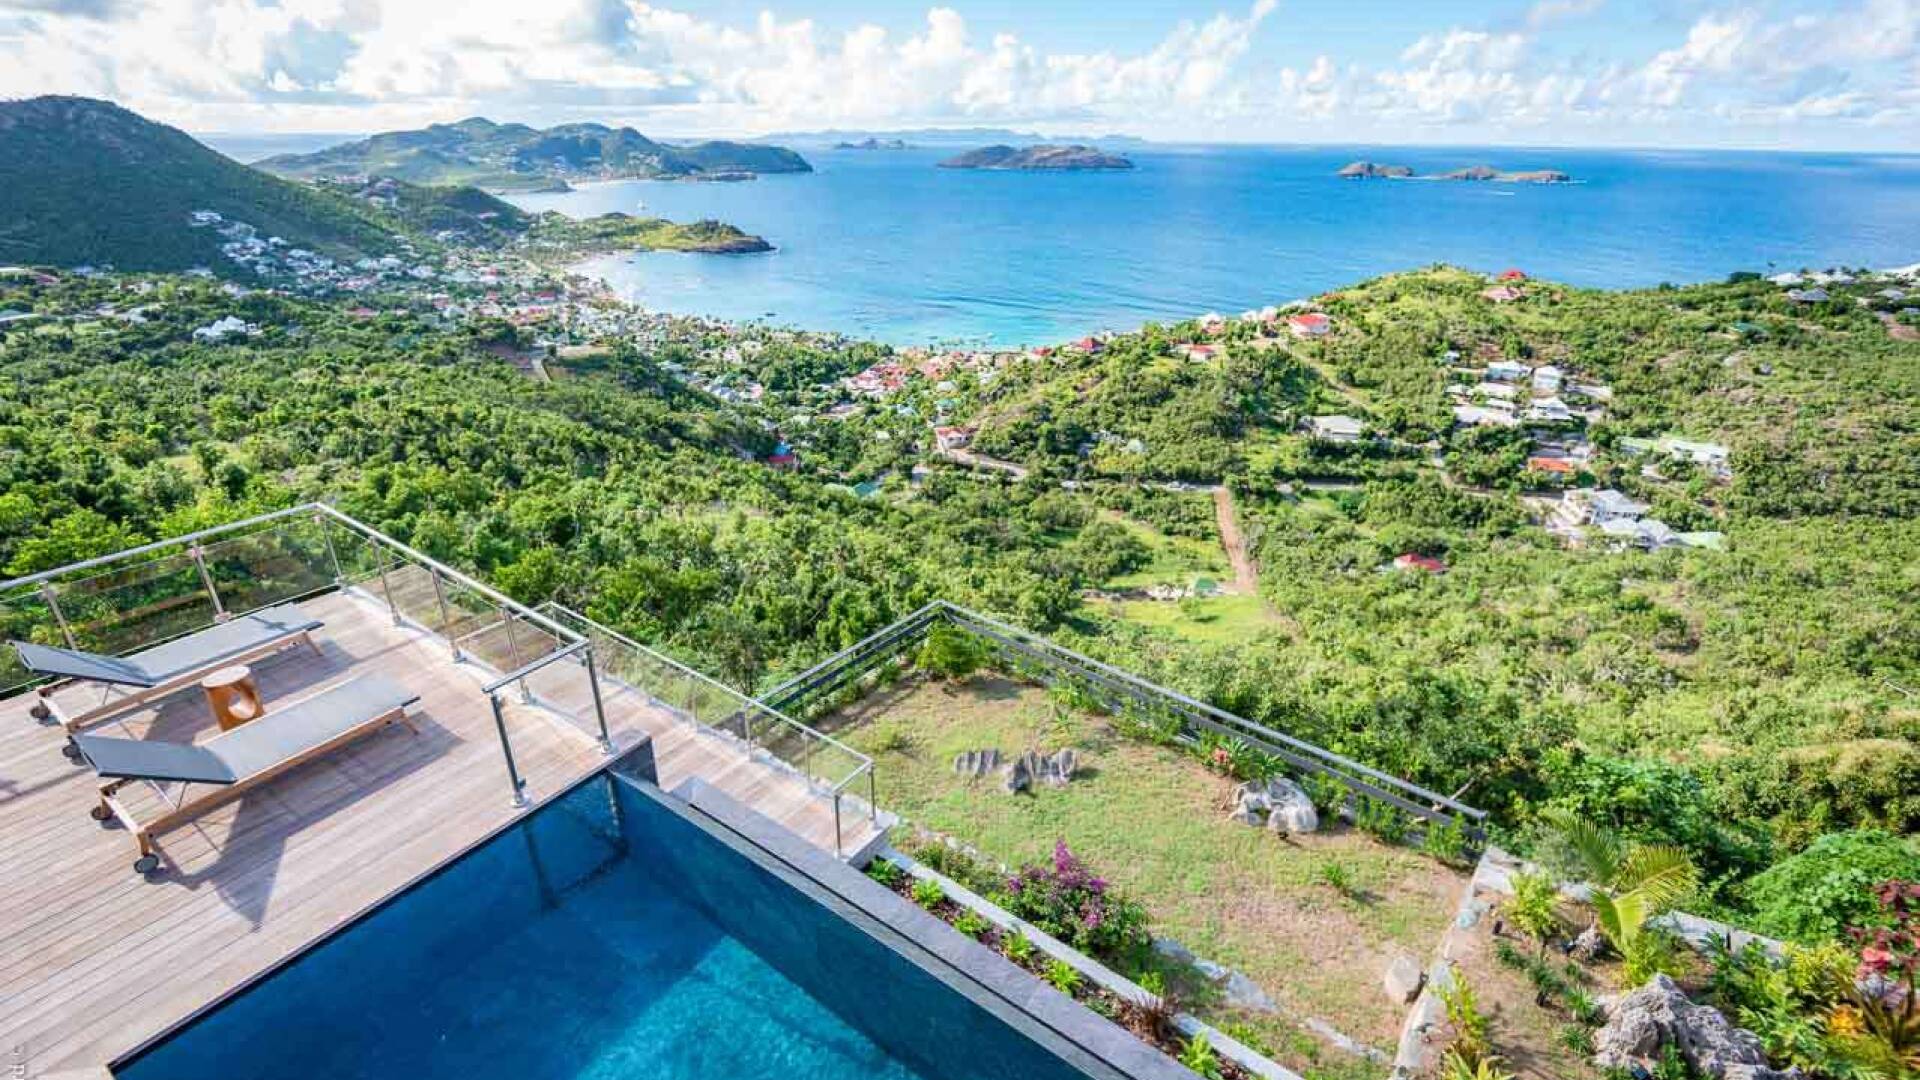 The view from WV GDV, Vitet, St. Barthelemy